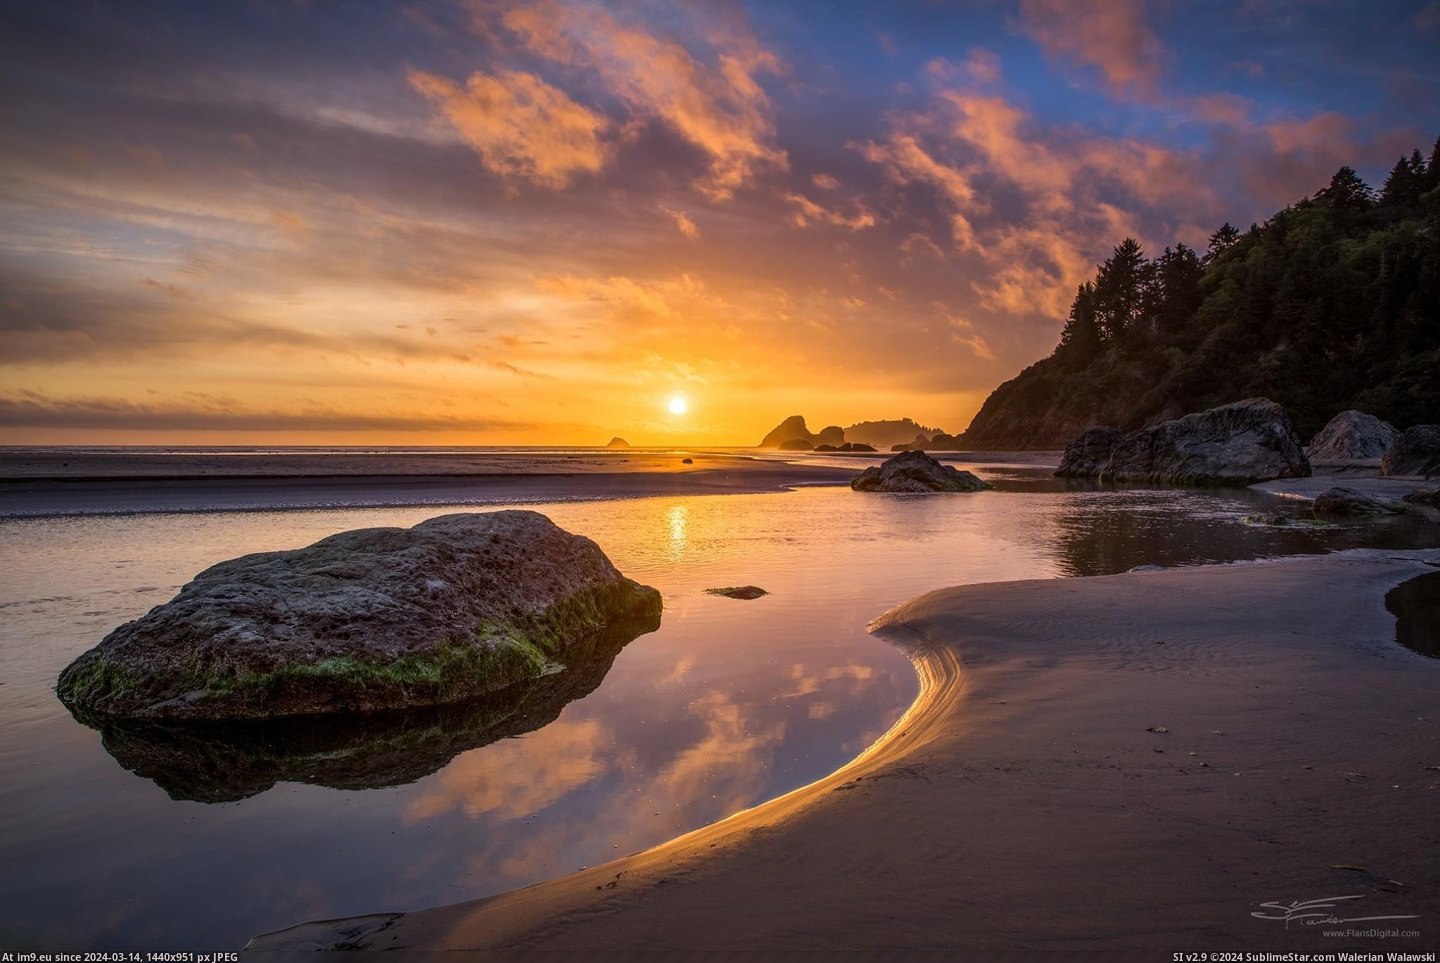 #Beach #Sunset #River #Perspective #Trinidad #2nd #Meets #2048x1365 [Earthporn] OC - 'Where River Meets Beach - 2nd Perspective' - Trinidad, CA - Moonstone Beach Sunset 6-3-15 [2048x1365] Pic. (Obraz z album My r/EARTHPORN favs))